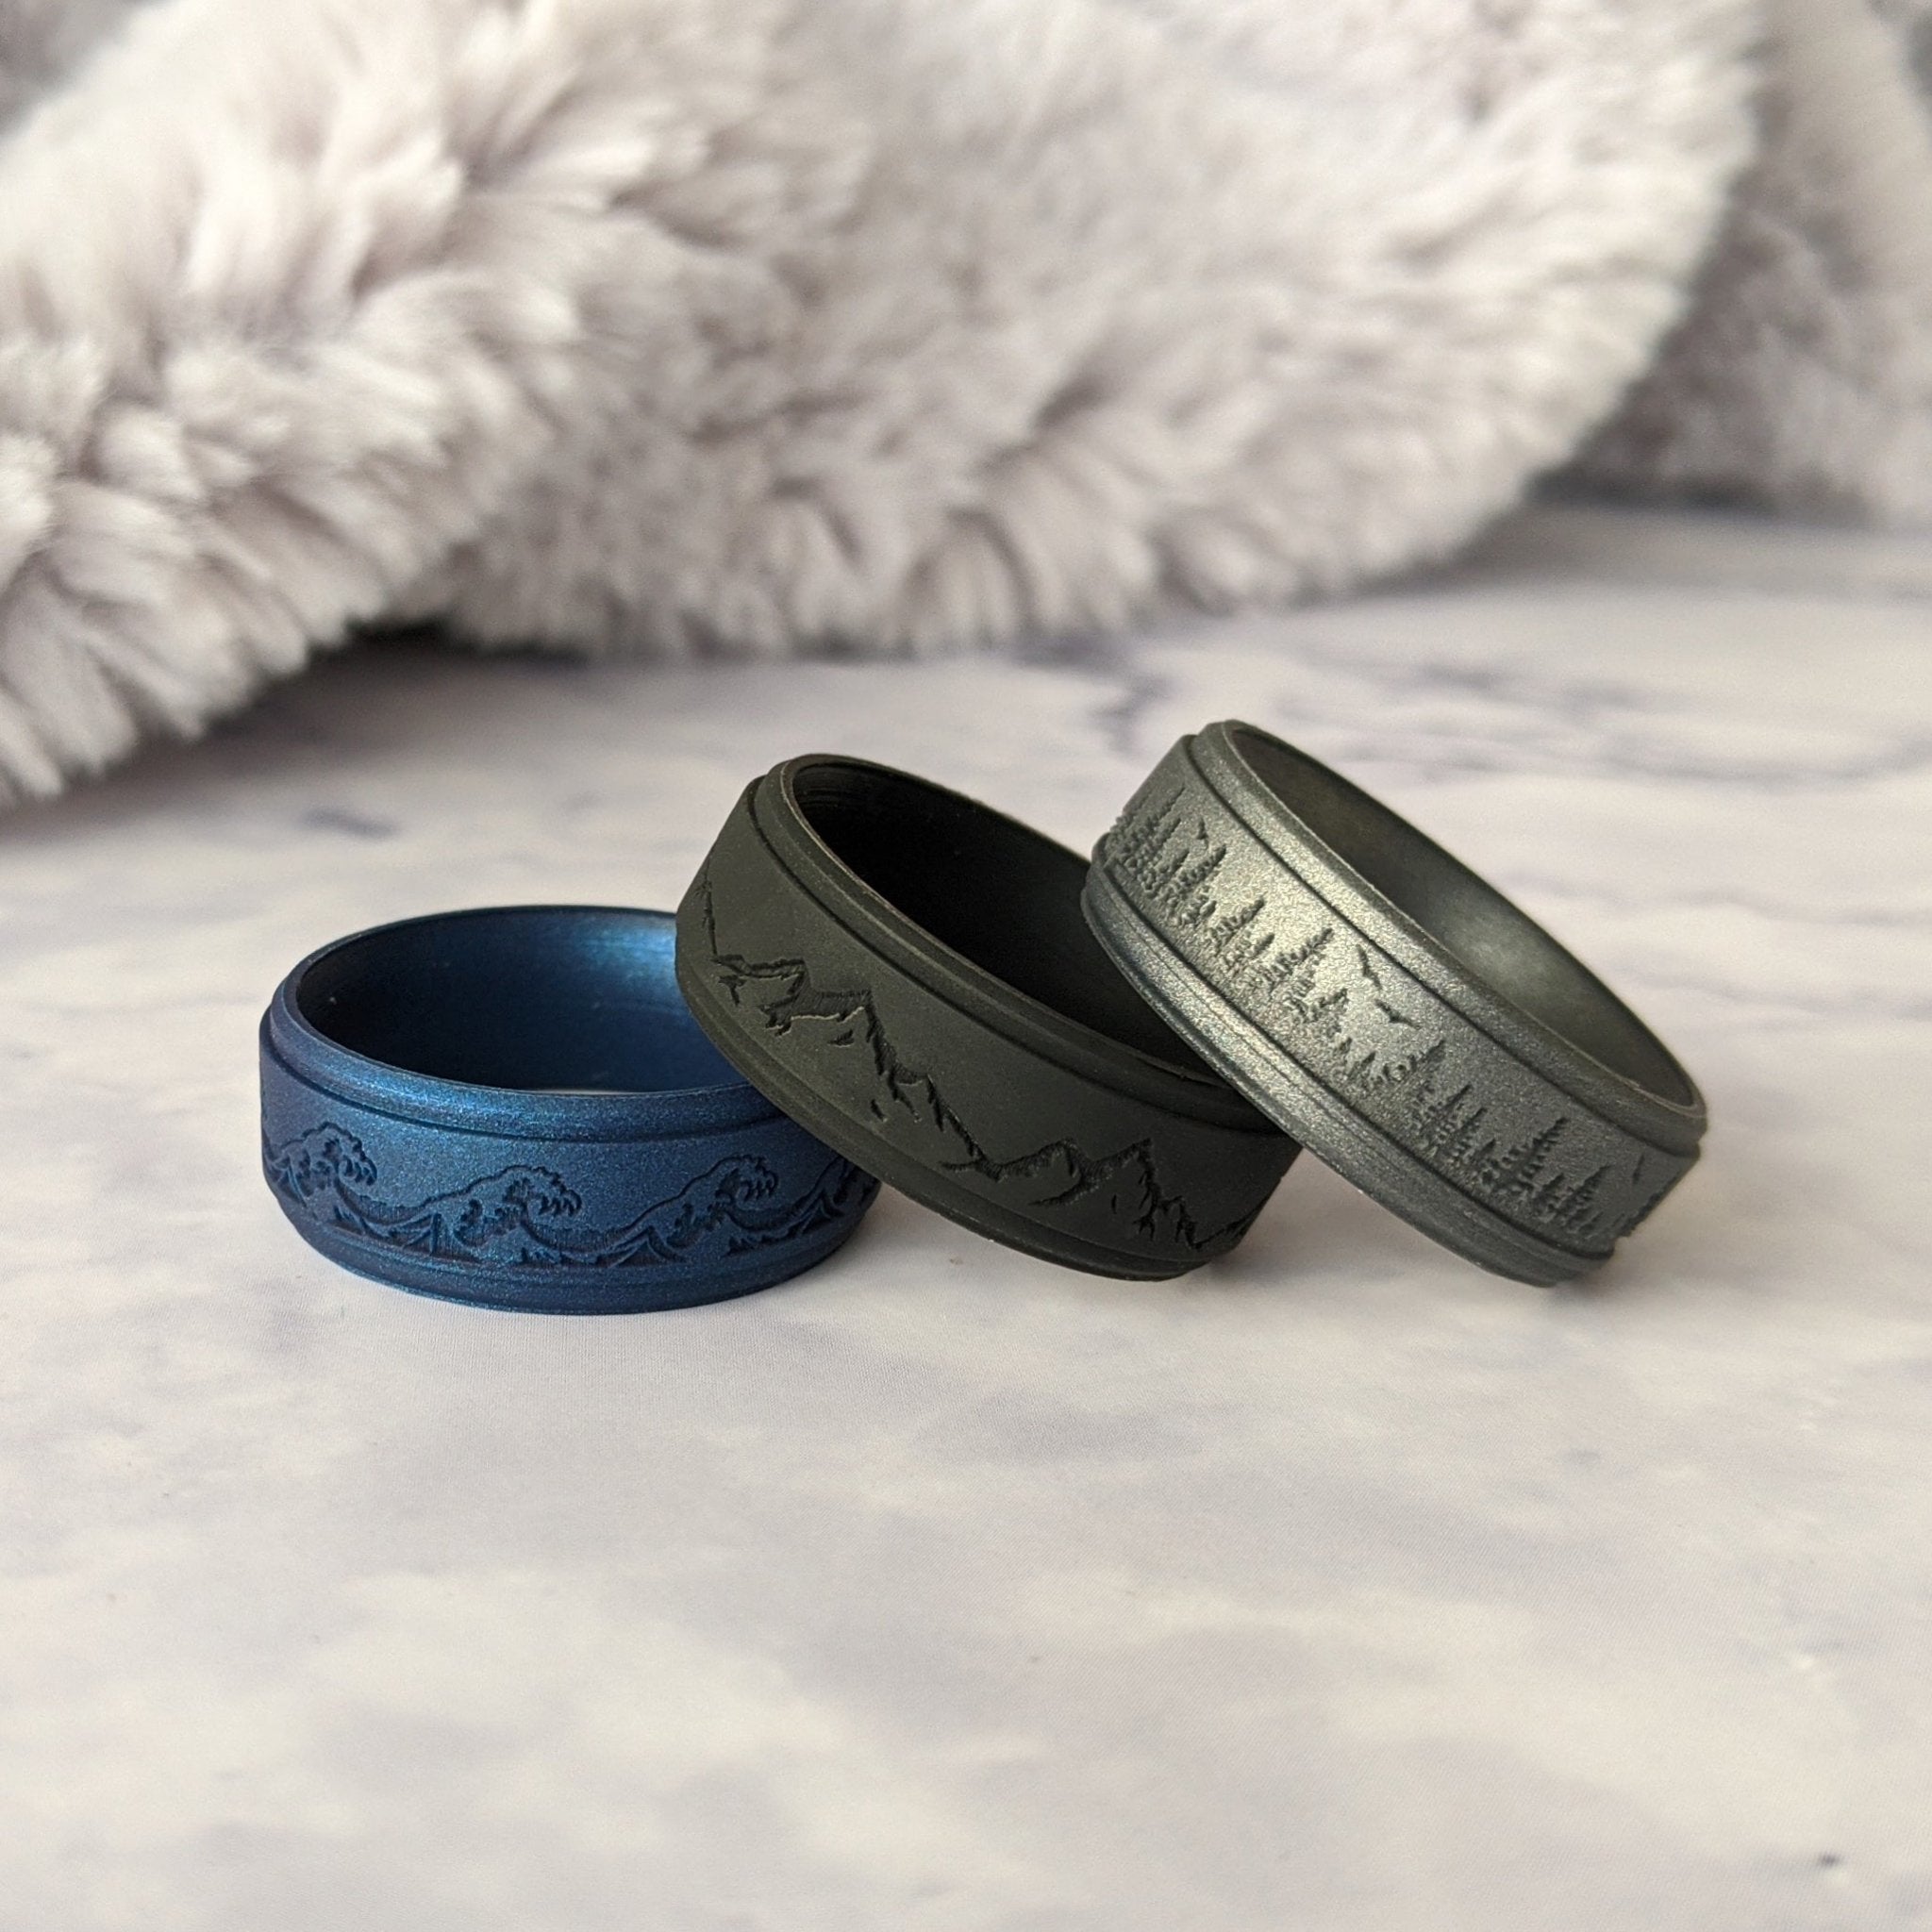 Custom Engraved Forest Trees Silicone Ring in Metal Blue, Dark Silver, Black, Green, or Teal - Knot Theory